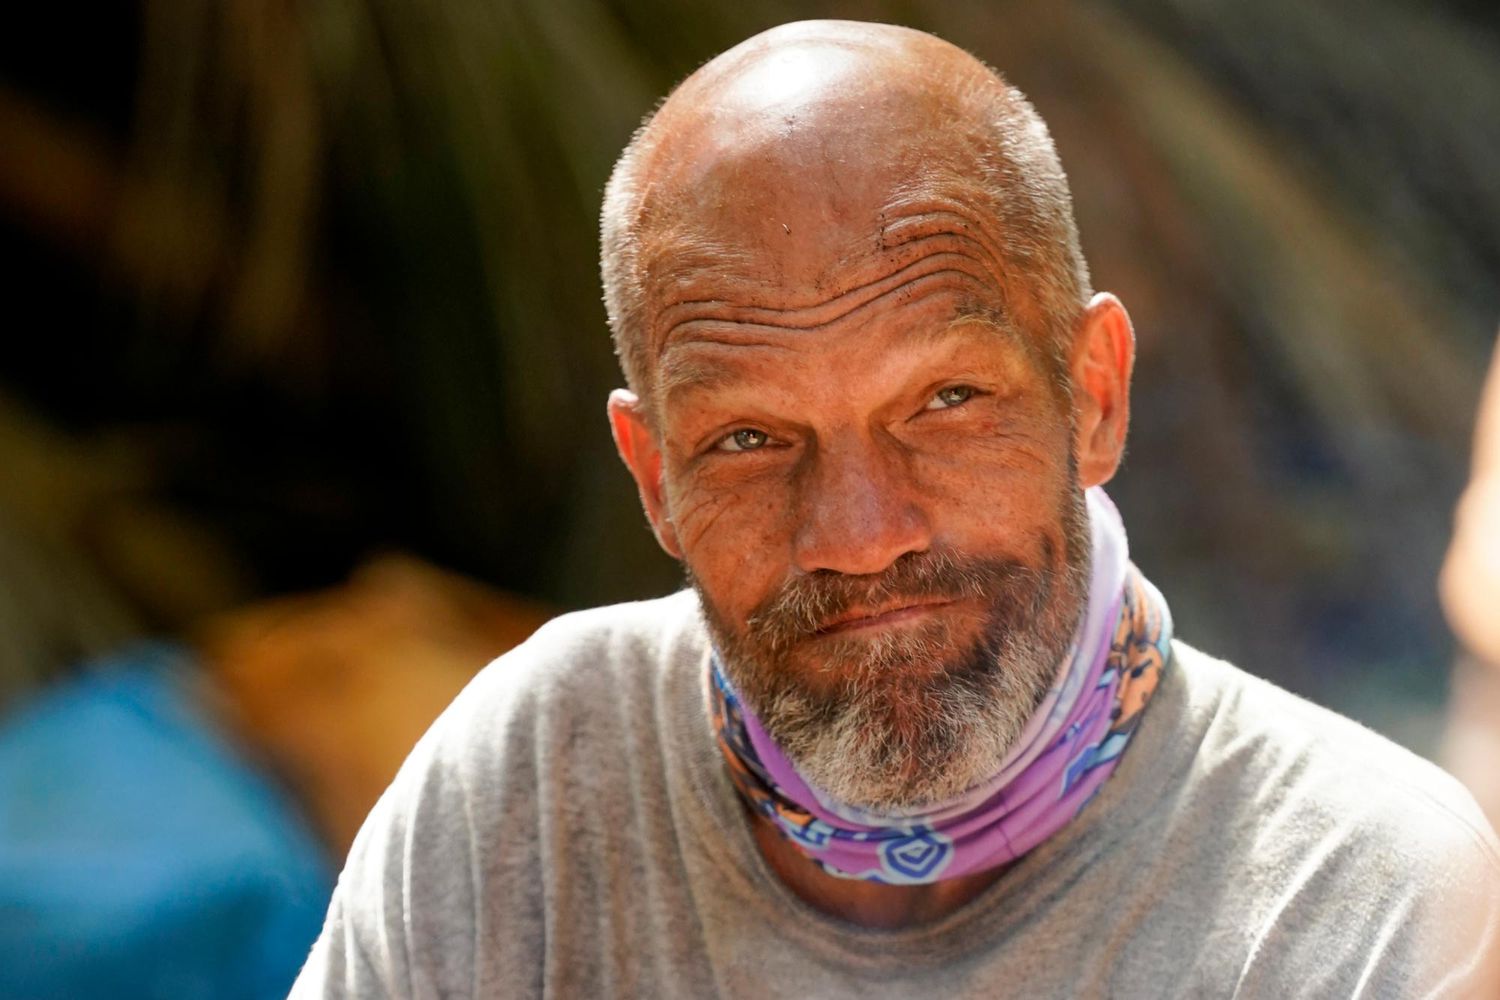 Mike Turner says final Survivor Tribal Council was like ‘falling off a cliff’